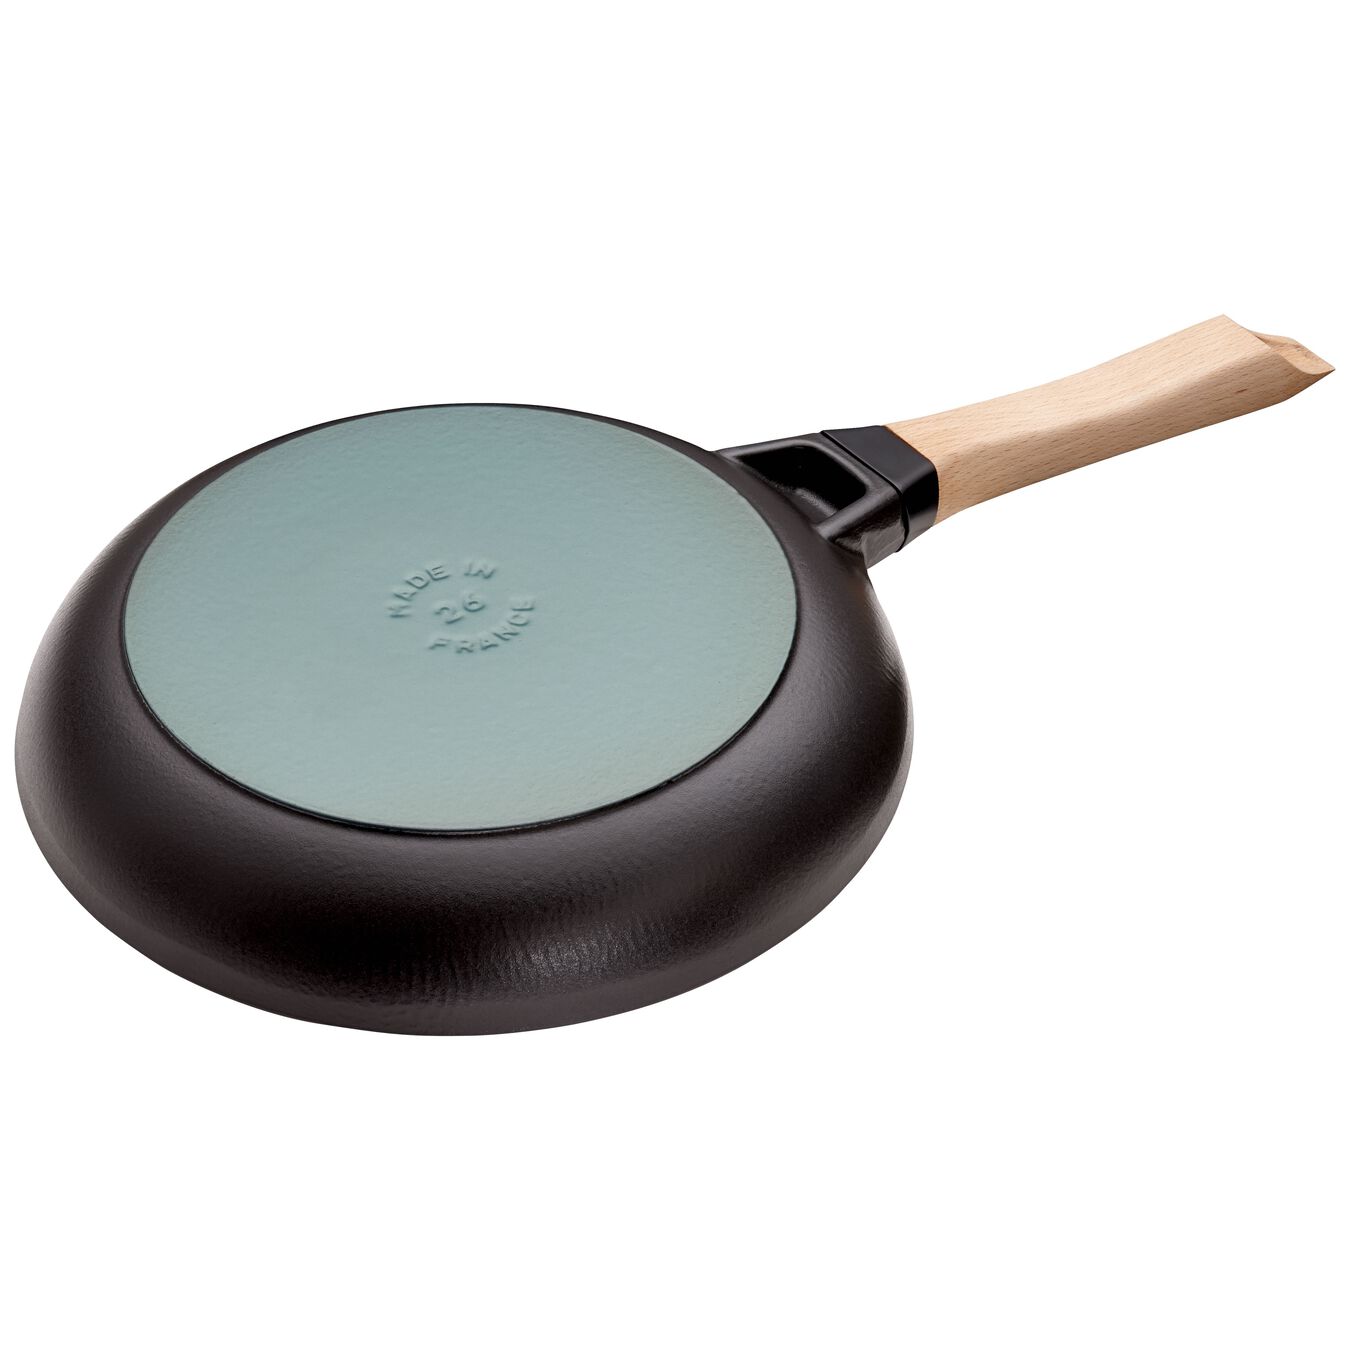 26 cm / 10 inch cast iron Frying pan with wooden handle, black,,large 2